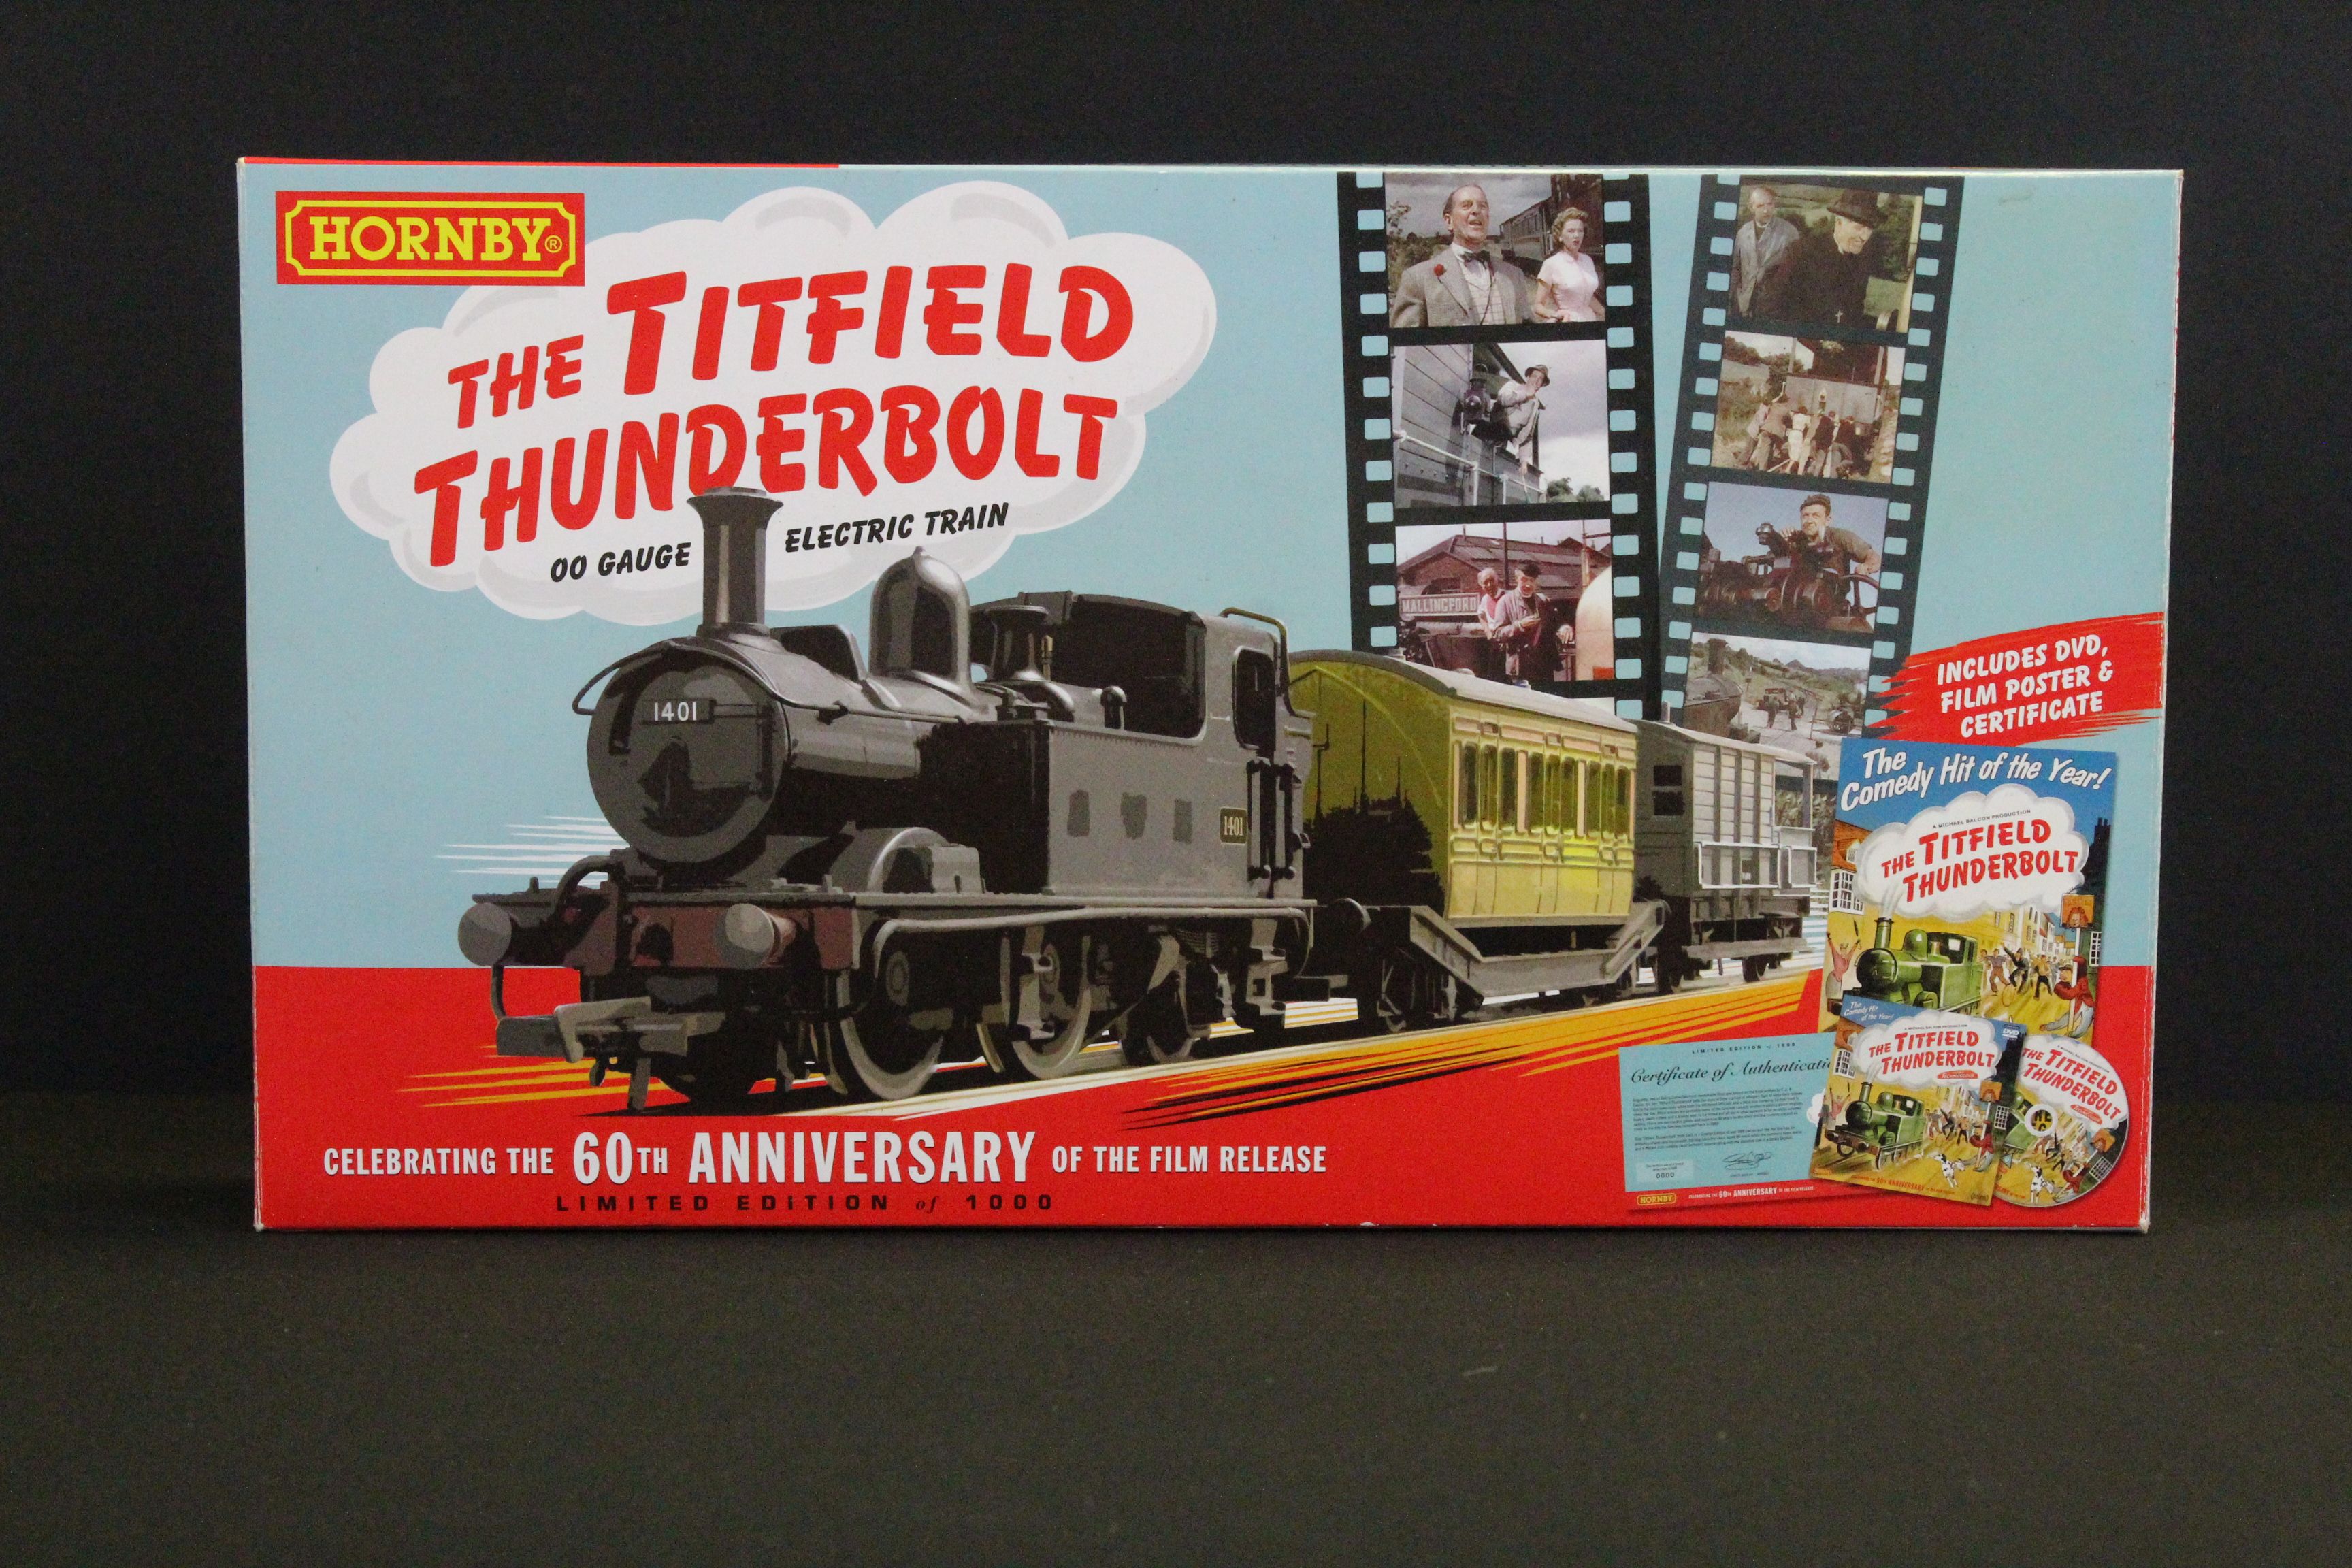 Boxed ltd edn Hornby OO gauge The Titfield Thunderbolt locomotive, complete with poster & DVD